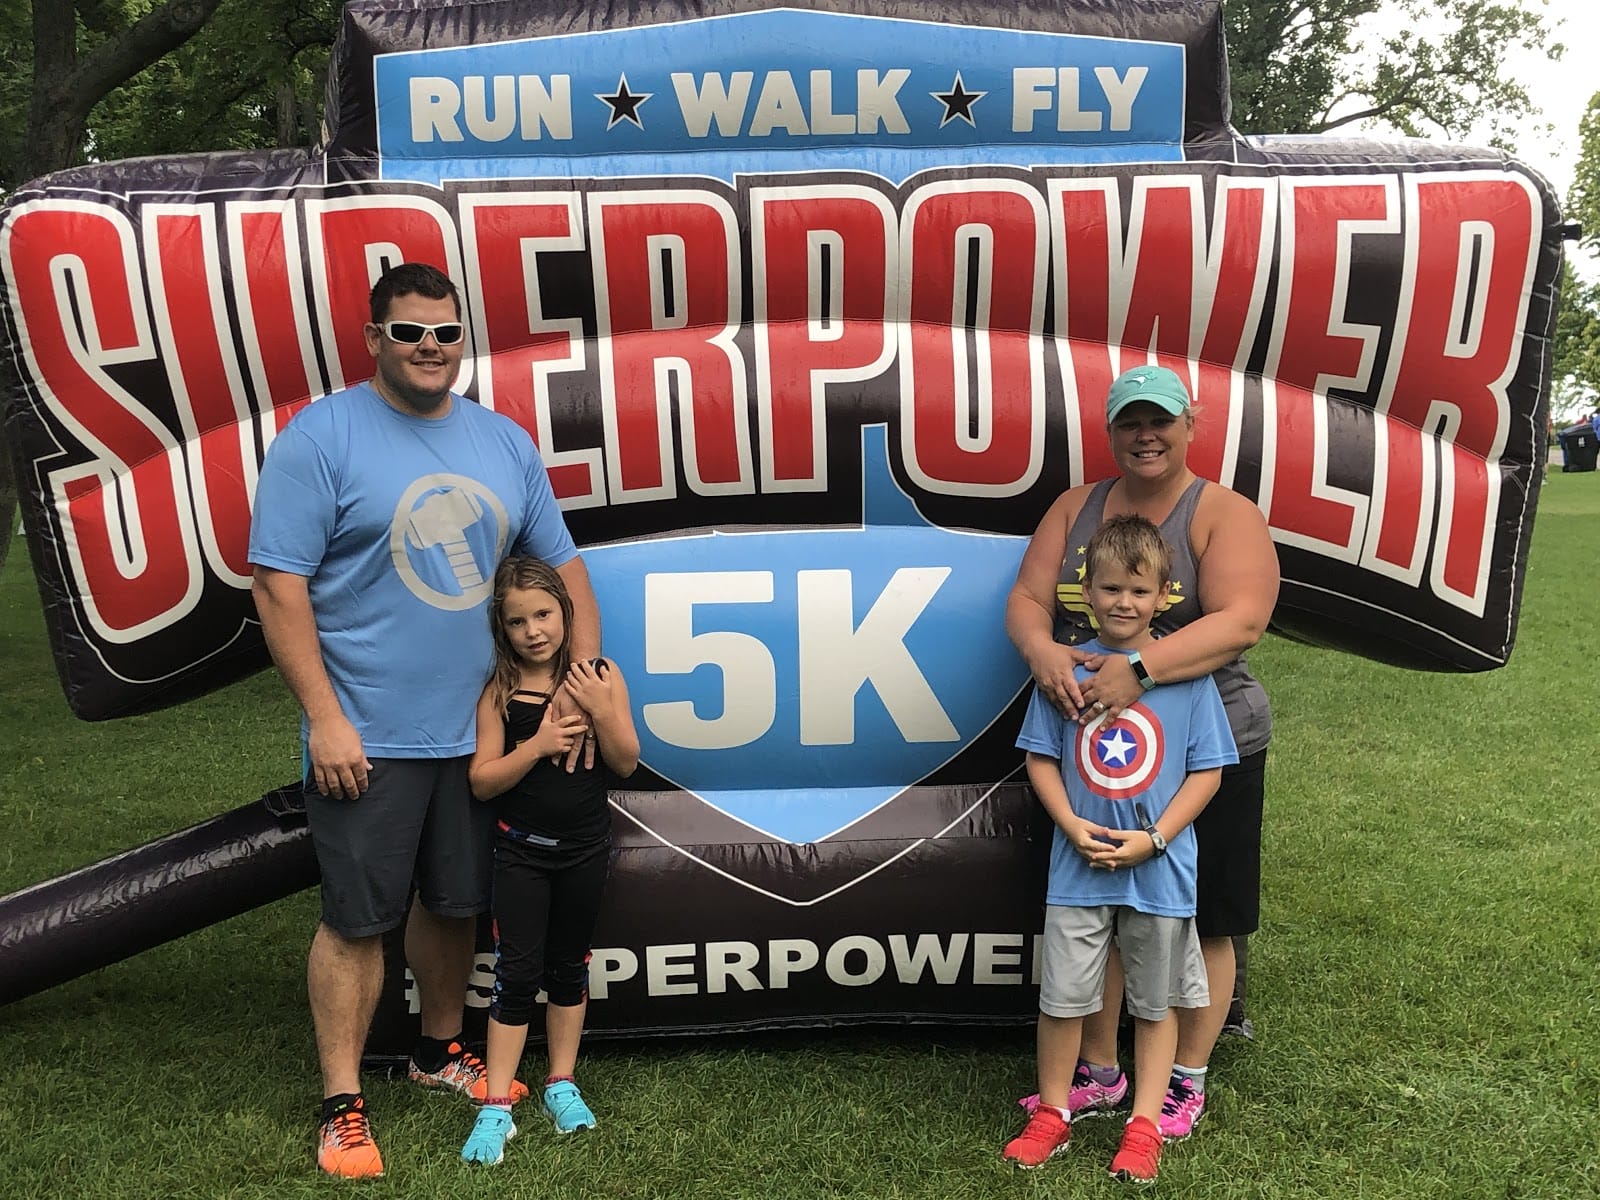 Family of four posing in front of a "superpower 5k" race banner at an outdoor event, with two children holding superhero shields.